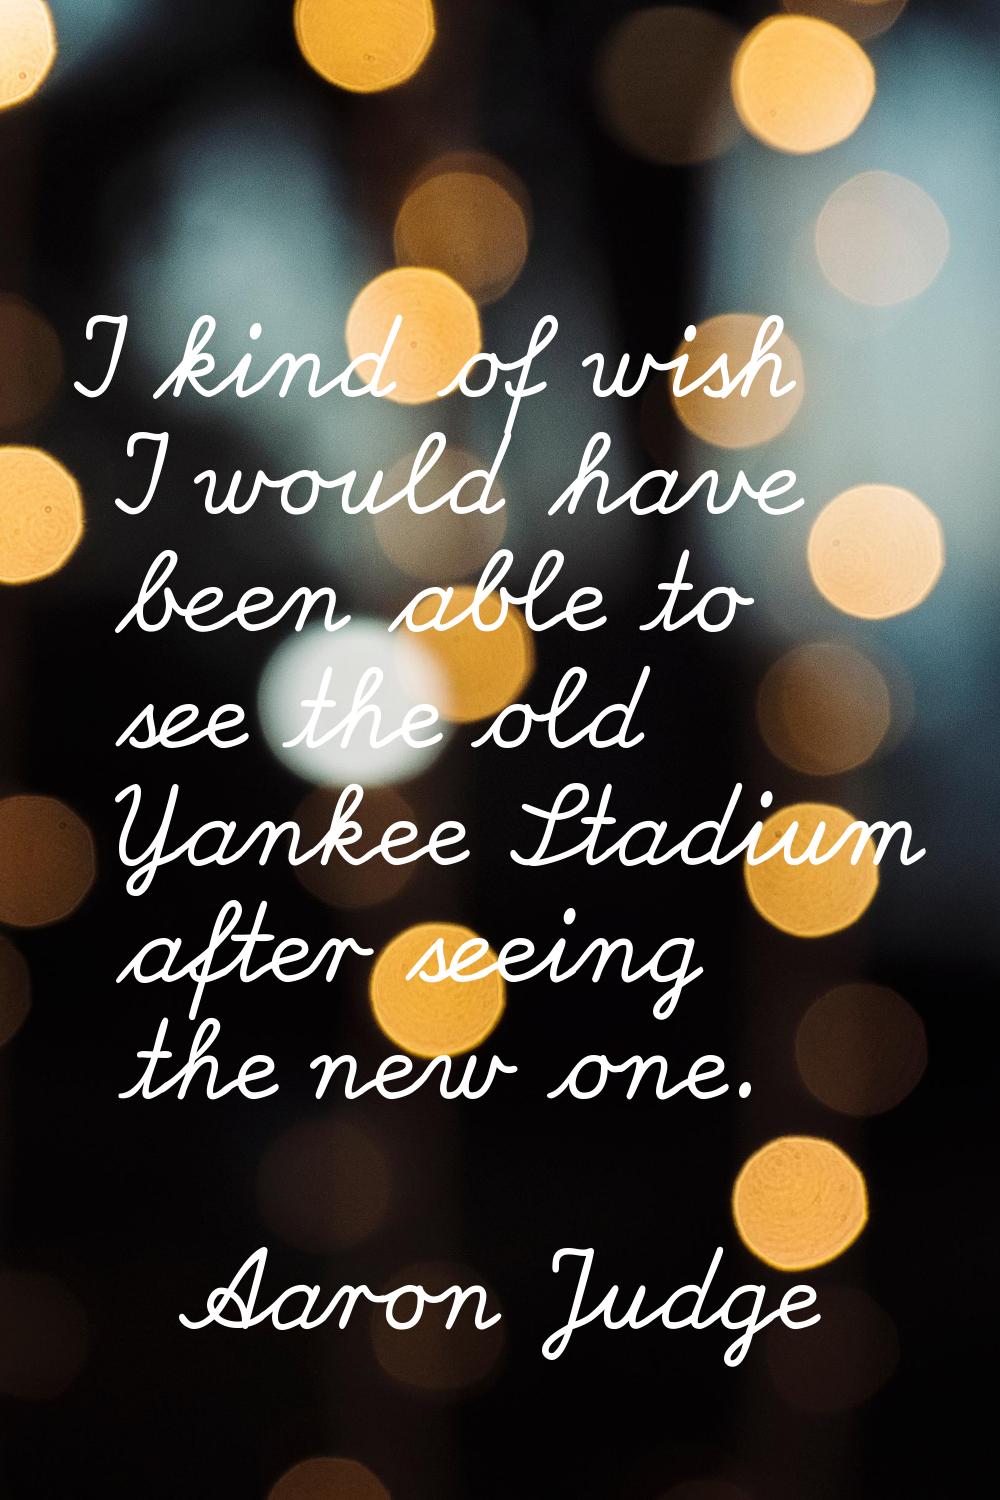 I kind of wish I would have been able to see the old Yankee Stadium after seeing the new one.